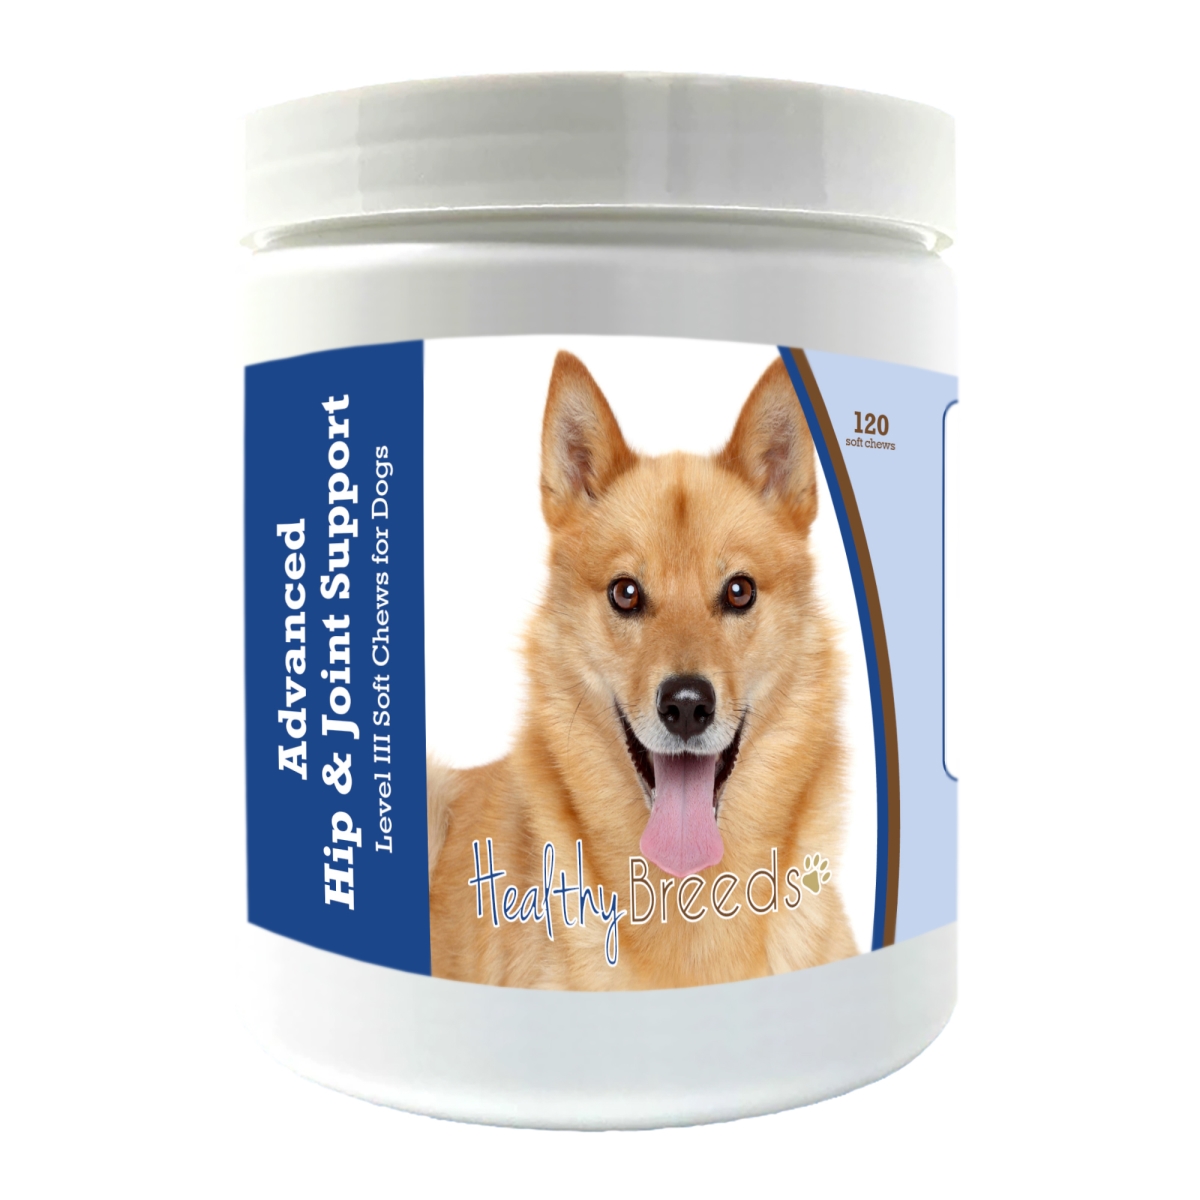 Picture of Healthy Breeds 192959898262 Finnish Spitz Advanced Hip & Joint Support Level III Soft Chews for Dogs